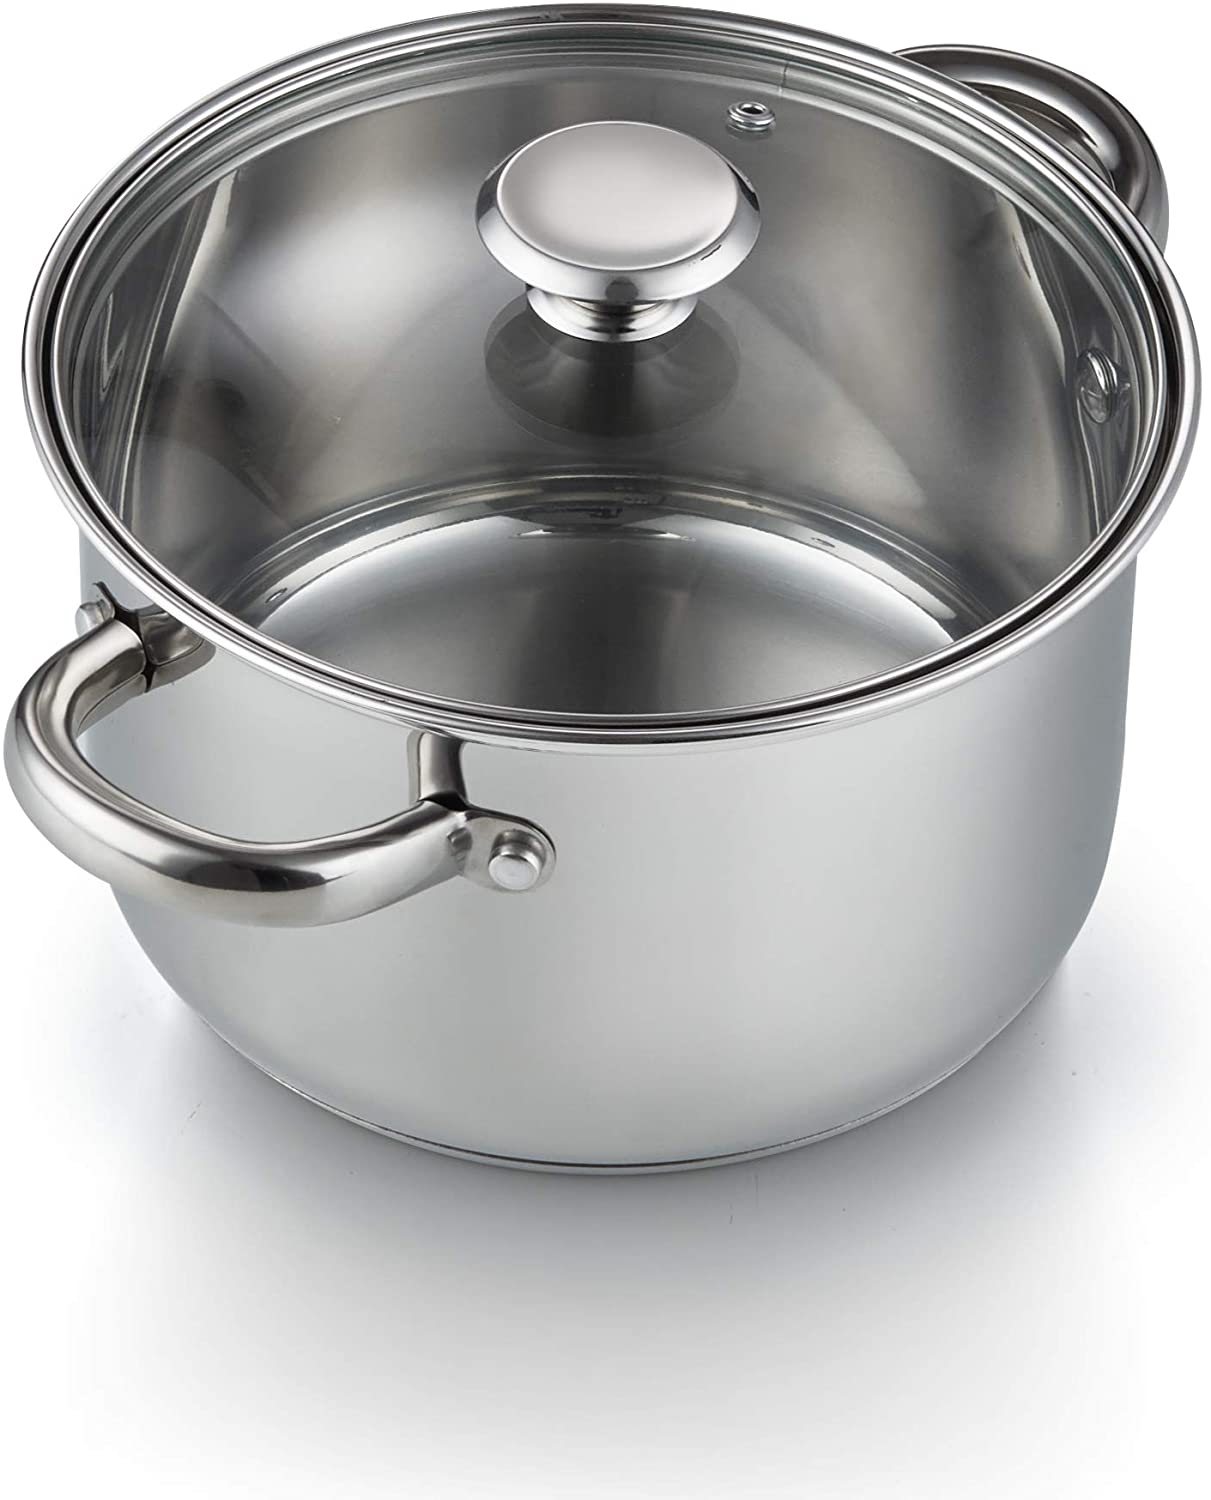 Cook N Home Stainless Steel Saucepan Double Boiler Steamer, 4Qt